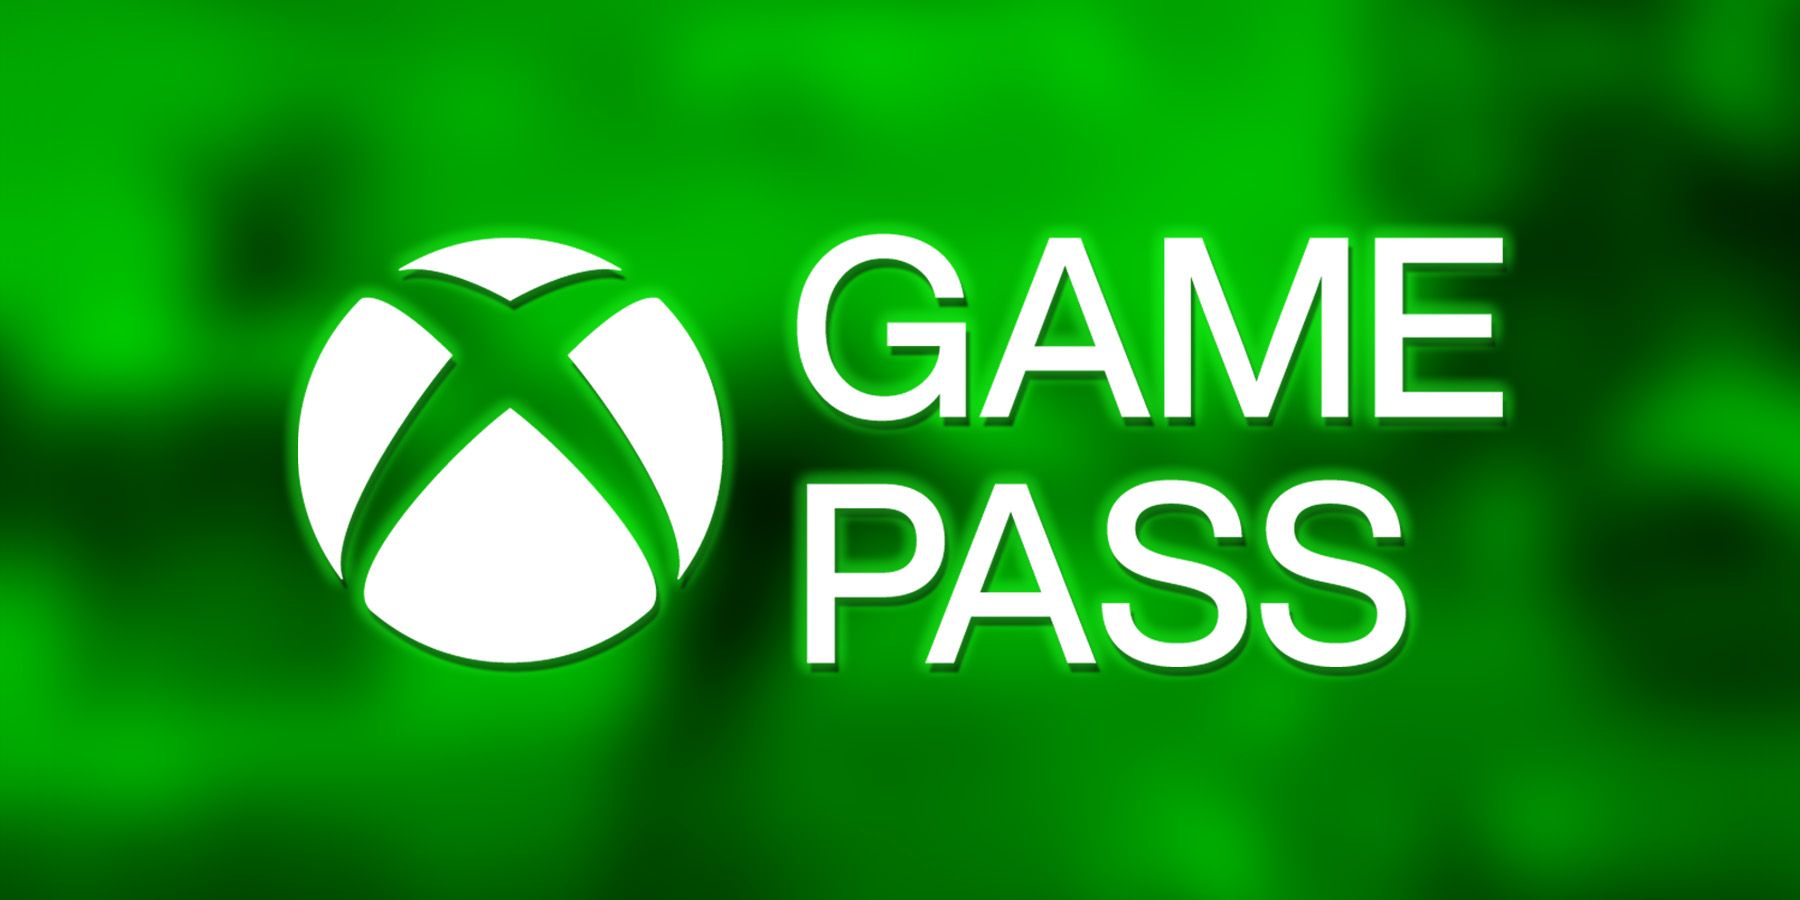 Xbox Game Pass logo on blurred green tinted No More Heroes 3 screenshot